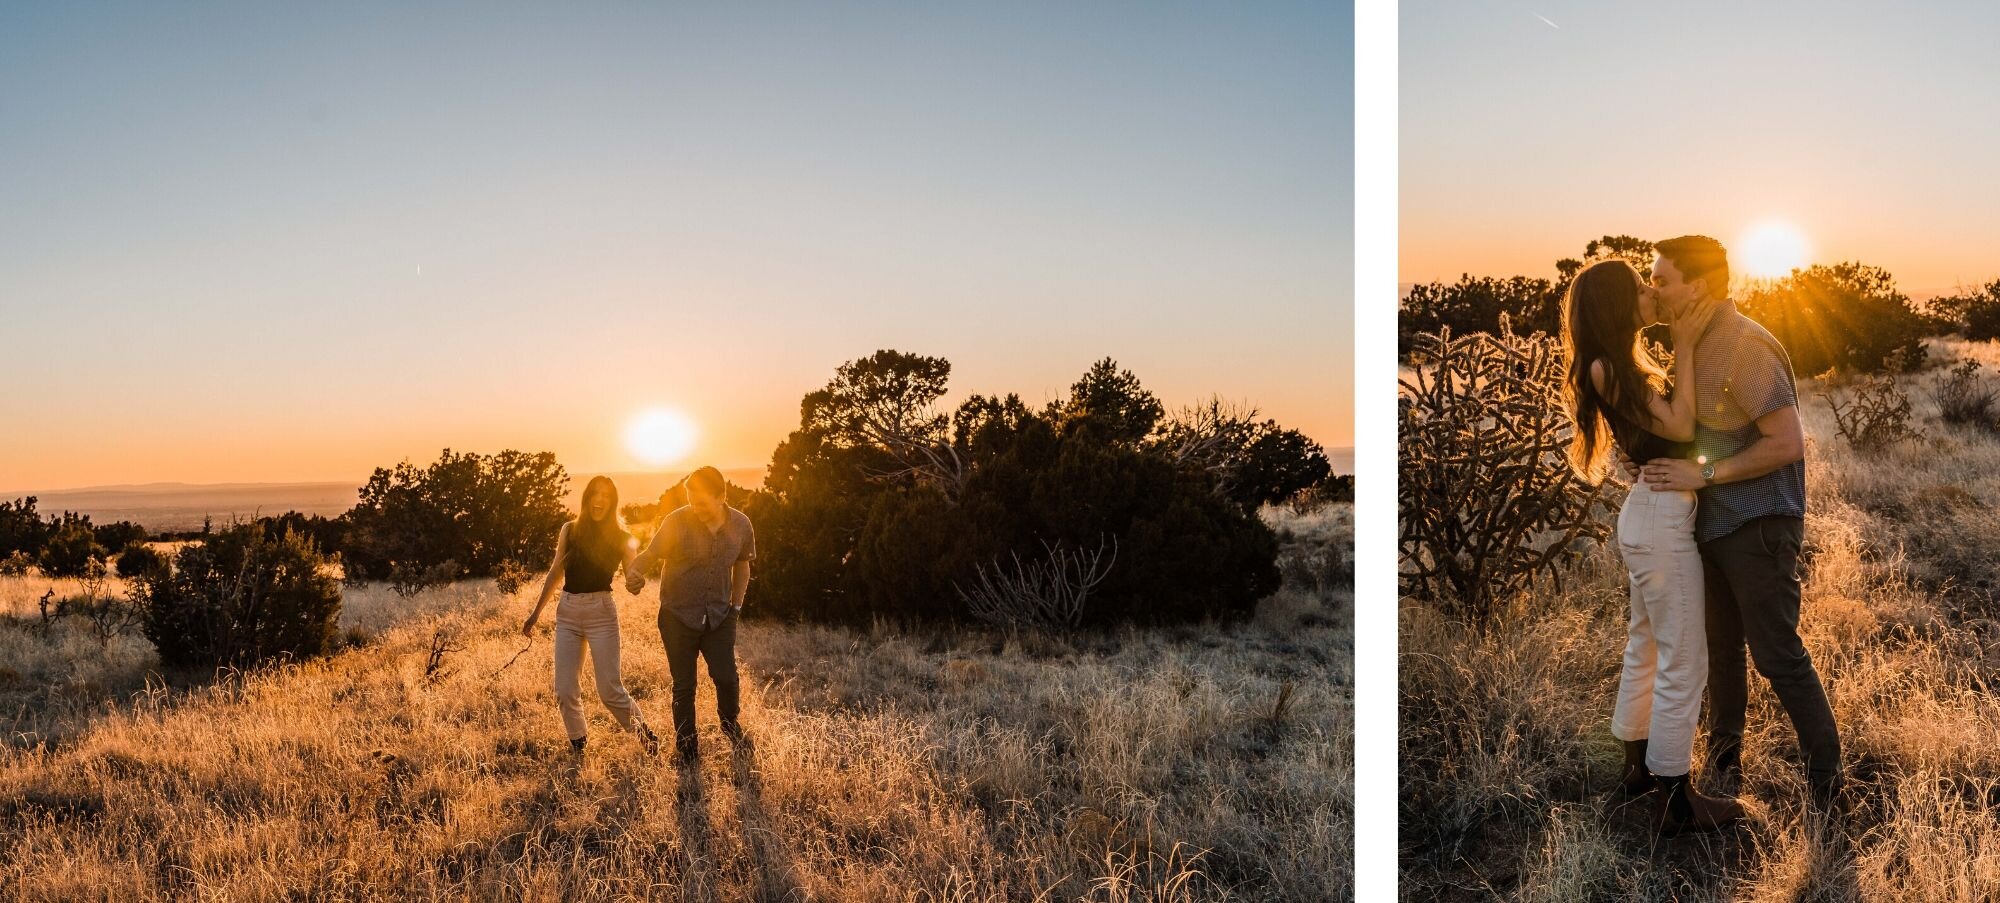 2.jpgHigh Desert Couples Session in Albuquerque, New Mexico | Between the Pine Adventure Elopement and Wedding Photography